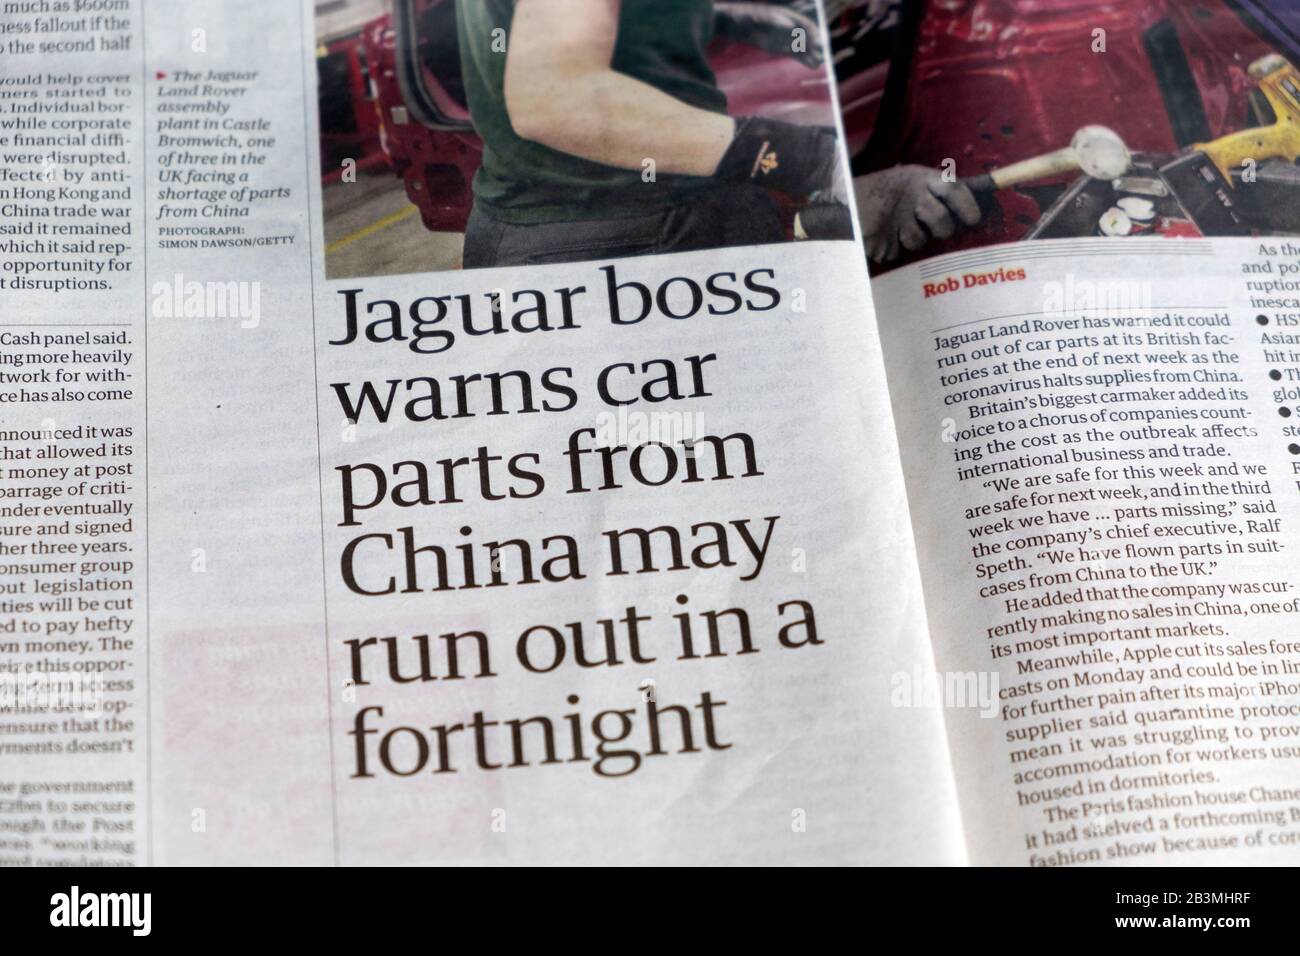 'Jaguar boss warns car parts from China may run out in a fortnight' coronavirus effect inside pages newspaper article in Guardian London England UK Stock Photo